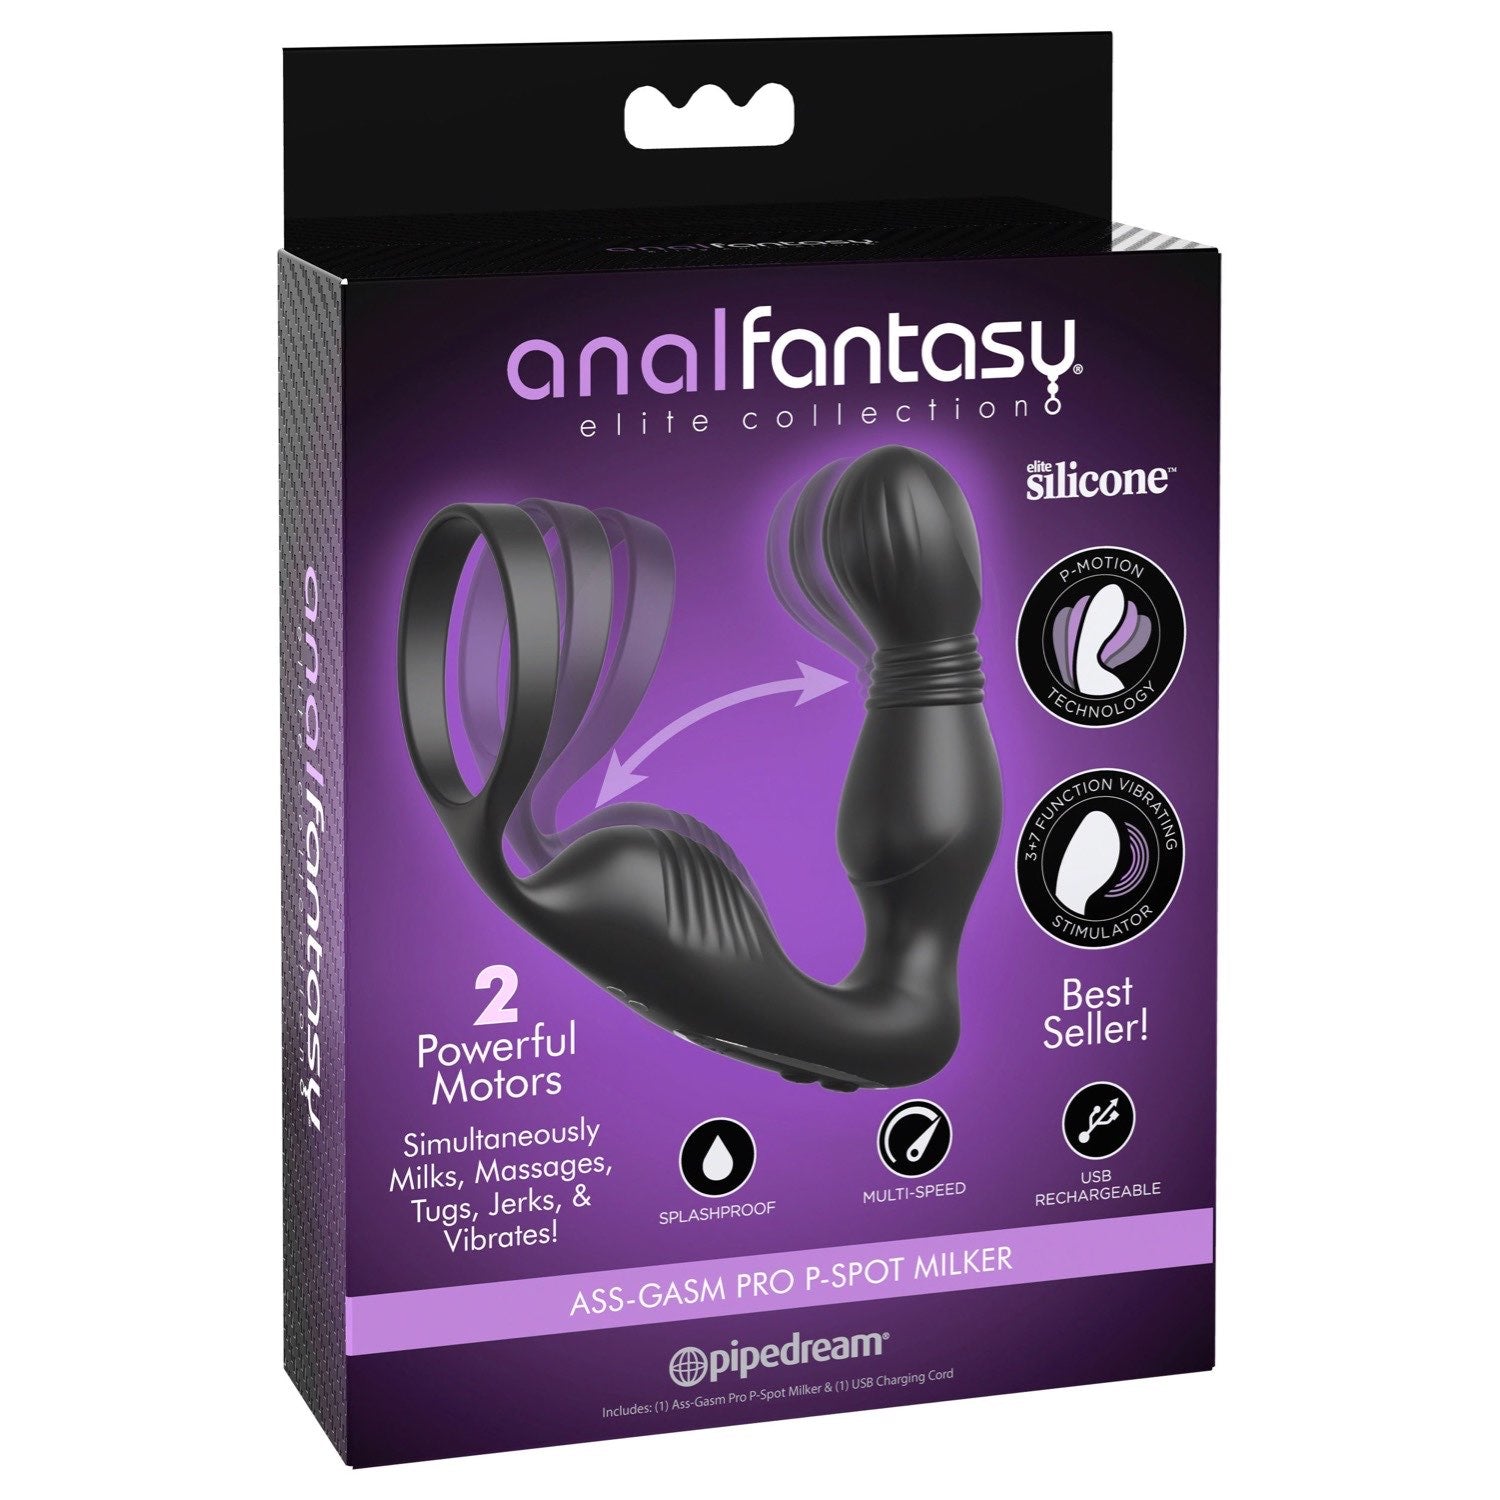 Anal Fantasy Elite Ass-Gasm P-Spot Milker - Black USB Rechargeable Prostate Massage with Cock Ring by Pipedream